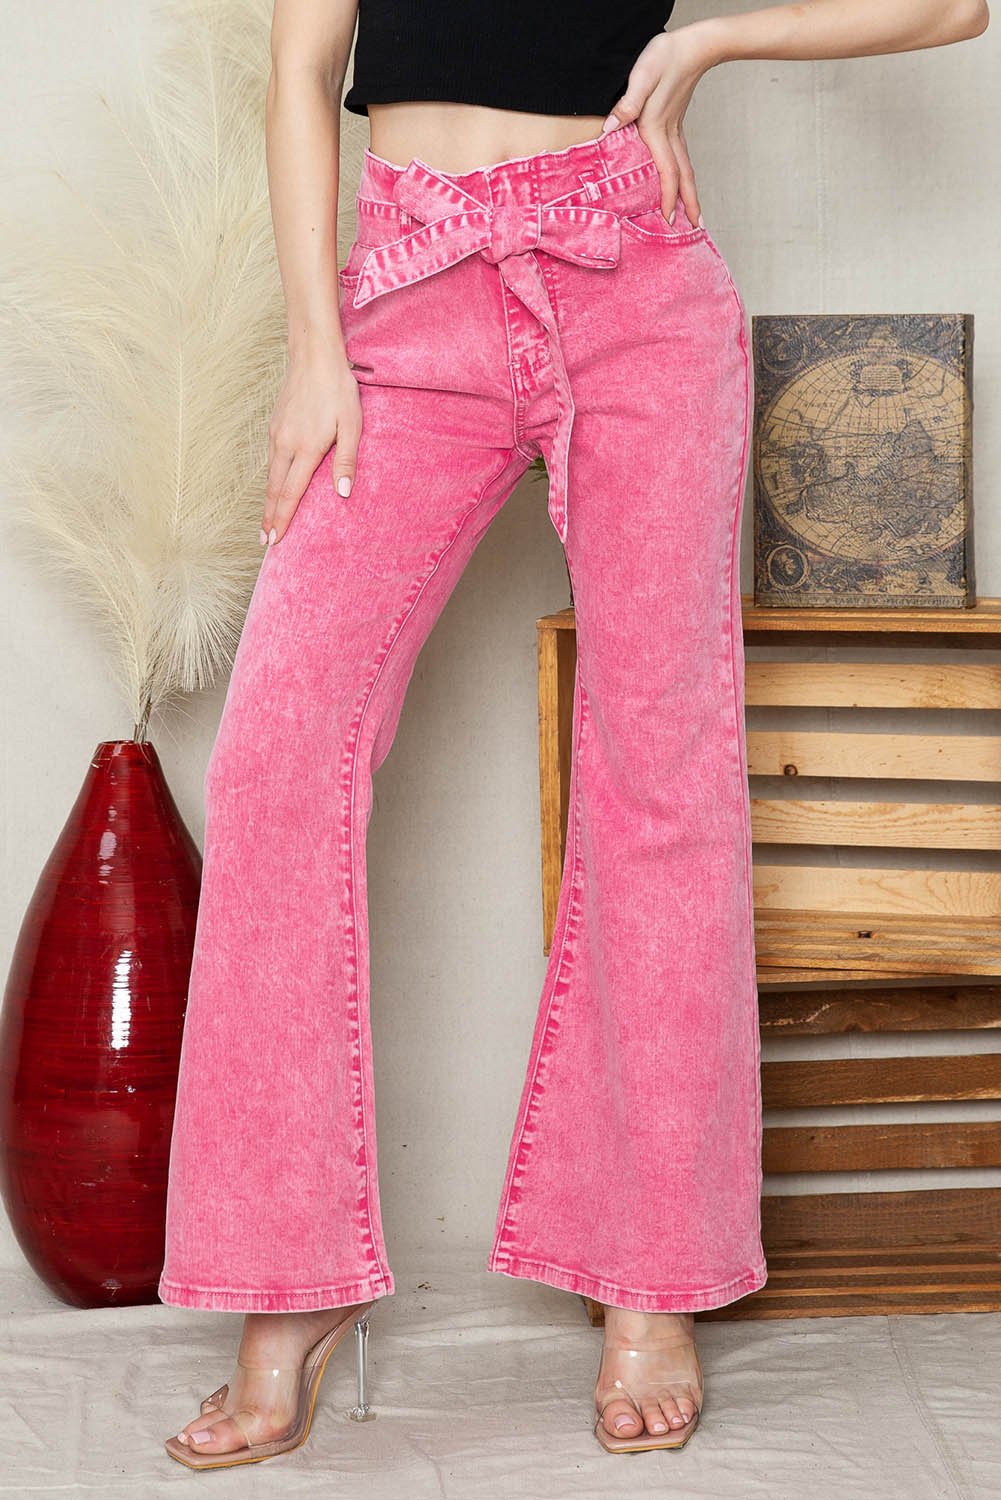 Pink Casual Front Knot High Waist Flare Leg Jeans